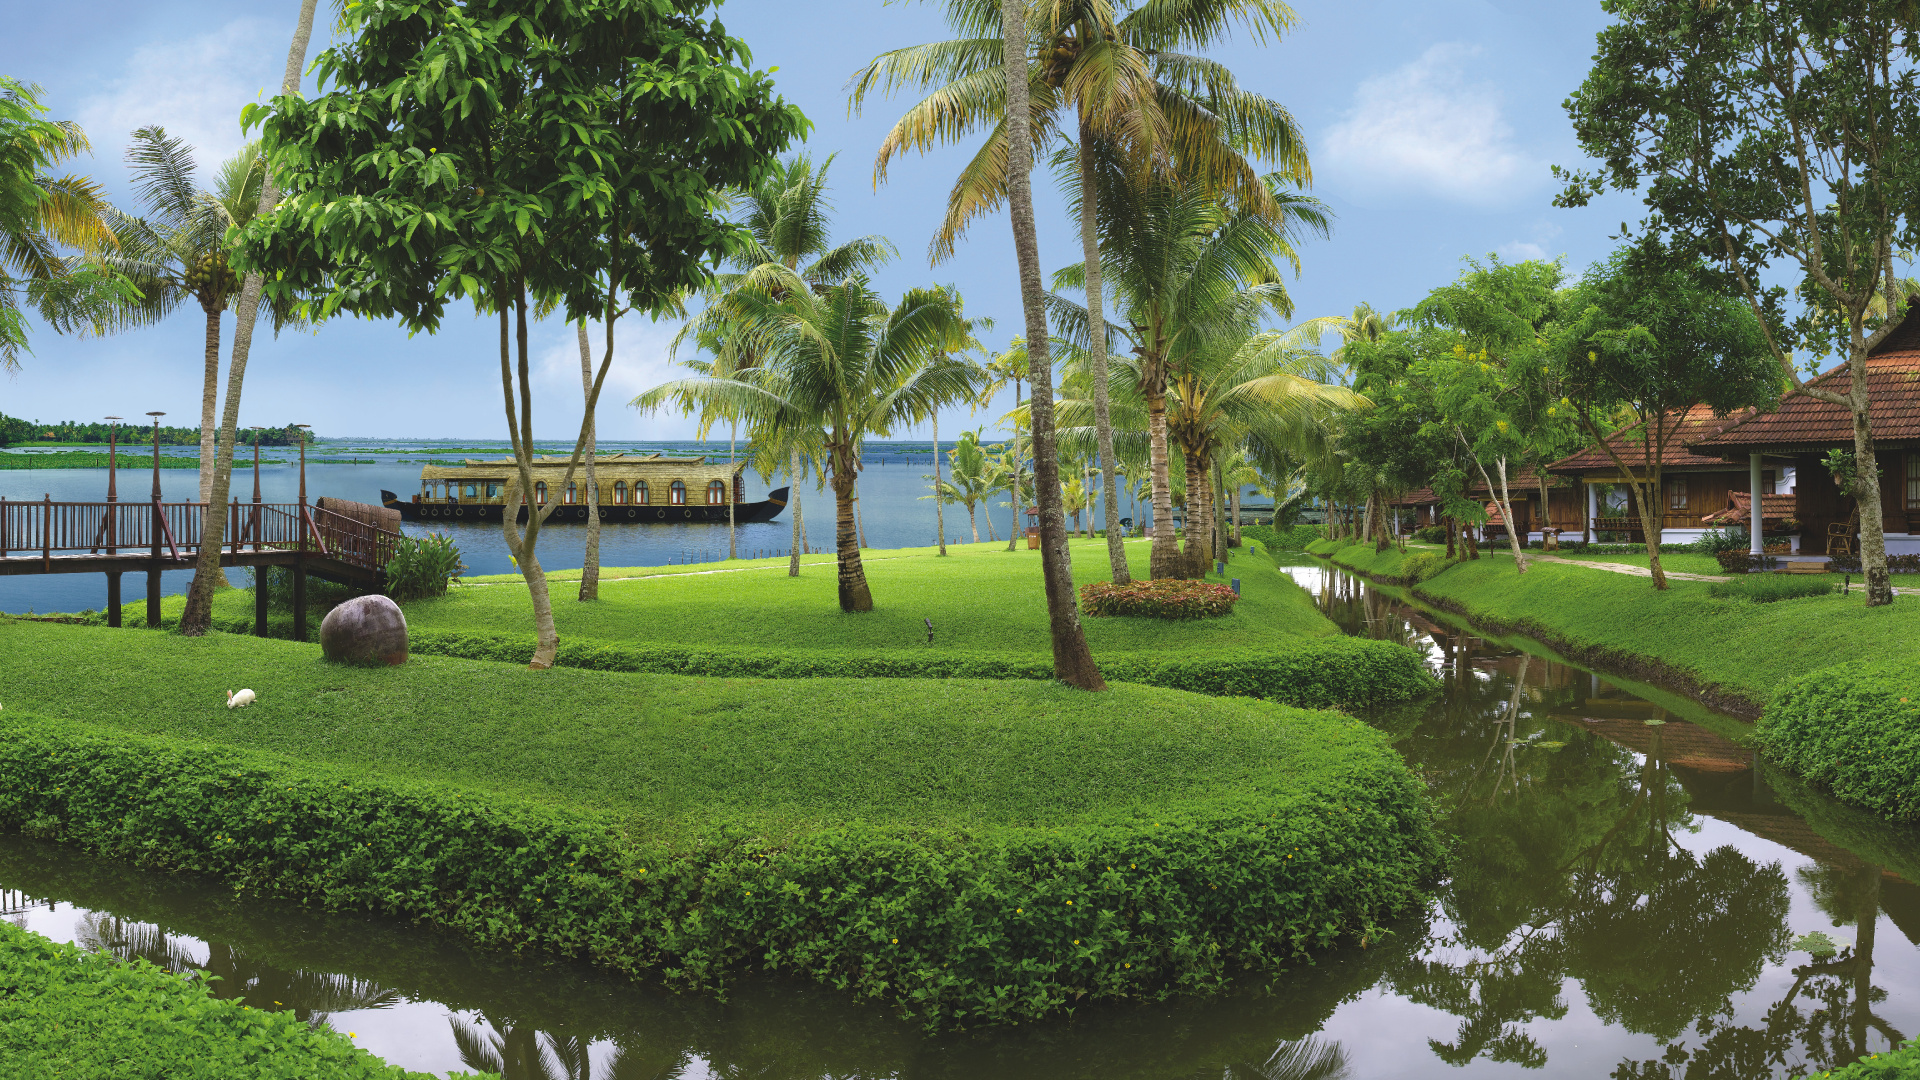 Green Palm Trees Near Body of Water During Daytime. Wallpaper in 1920x1080 Resolution